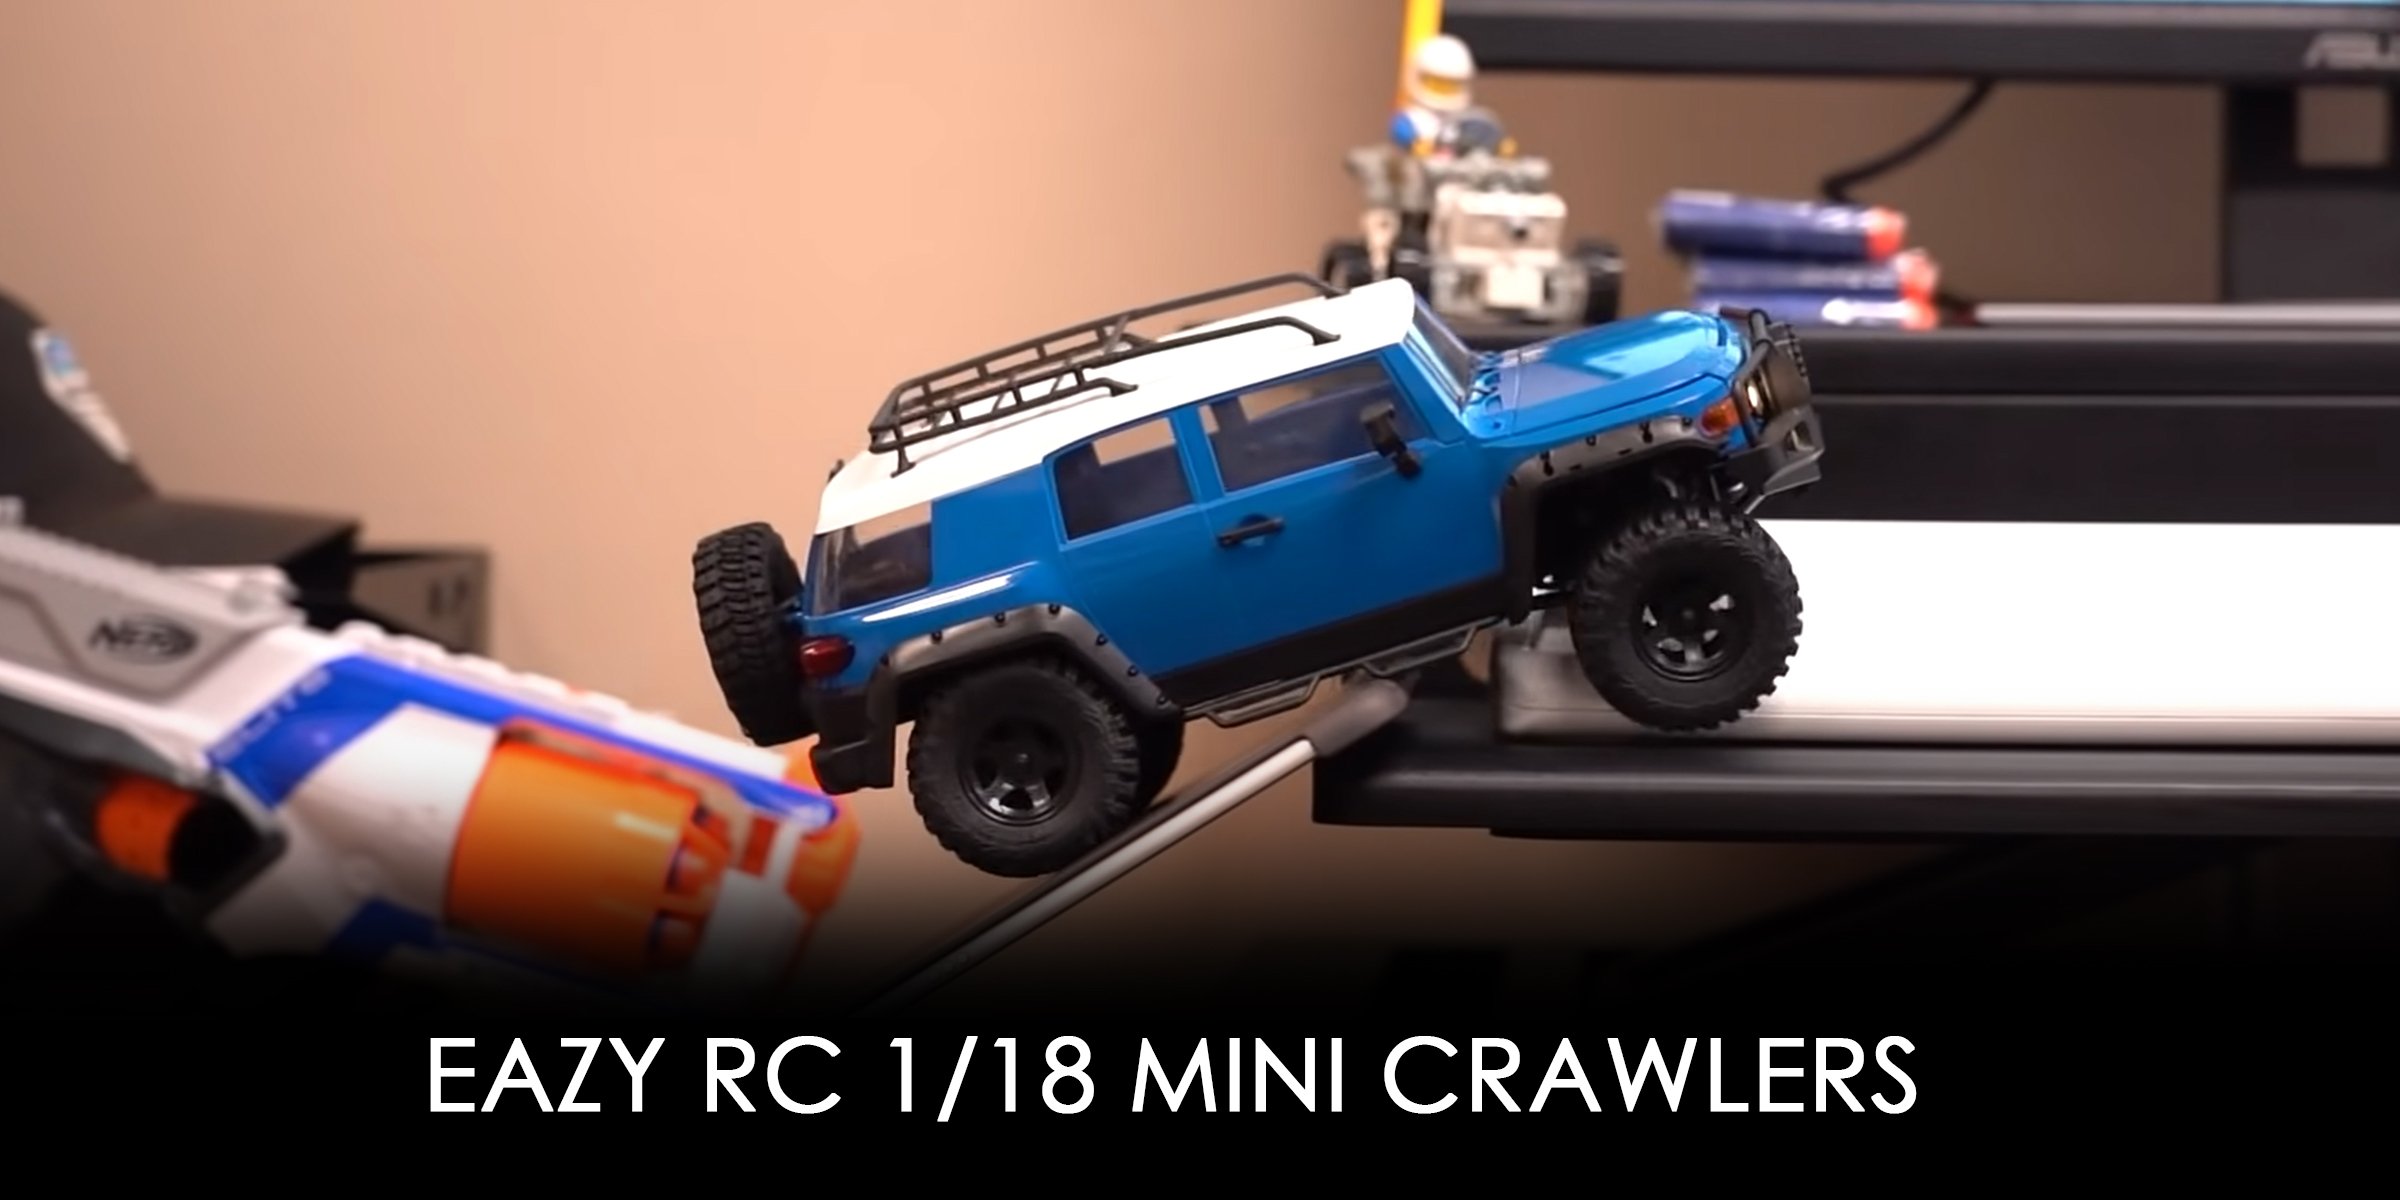 Top 10 Indoor RC Cars - #2 Eazy RC 1:18 Scale Crawlers